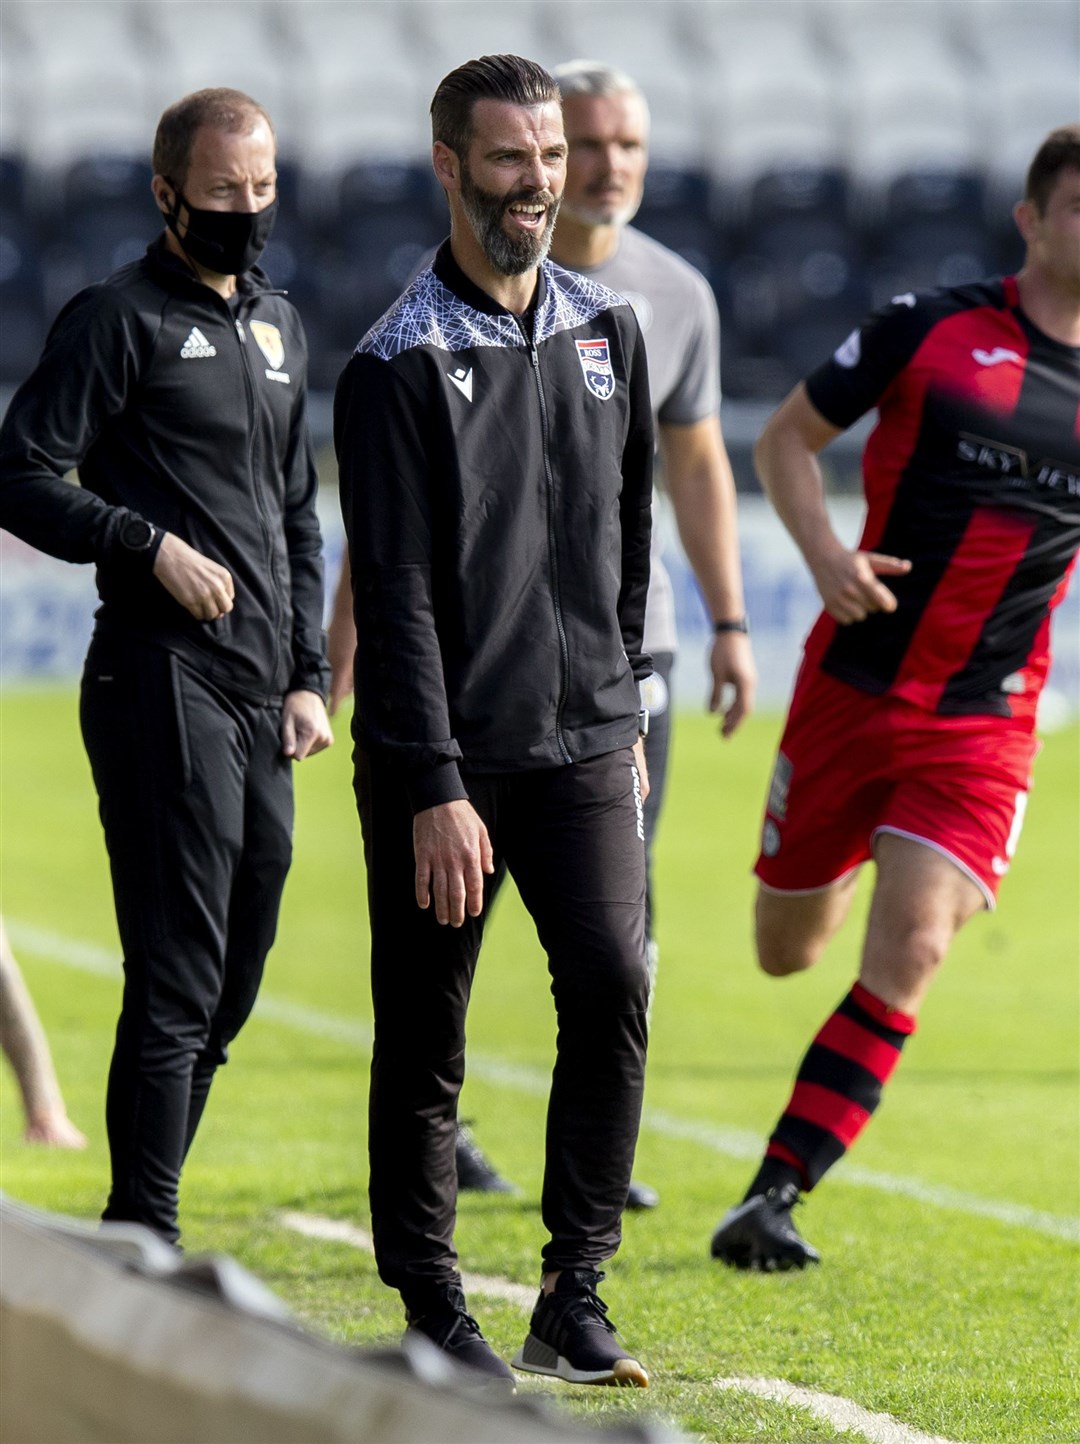 Picture - Ken Macpherson, Inverness. St. Mirren(1) v Ross County(1). 22.08.20. Ross County manager Stuart Kettlewell.